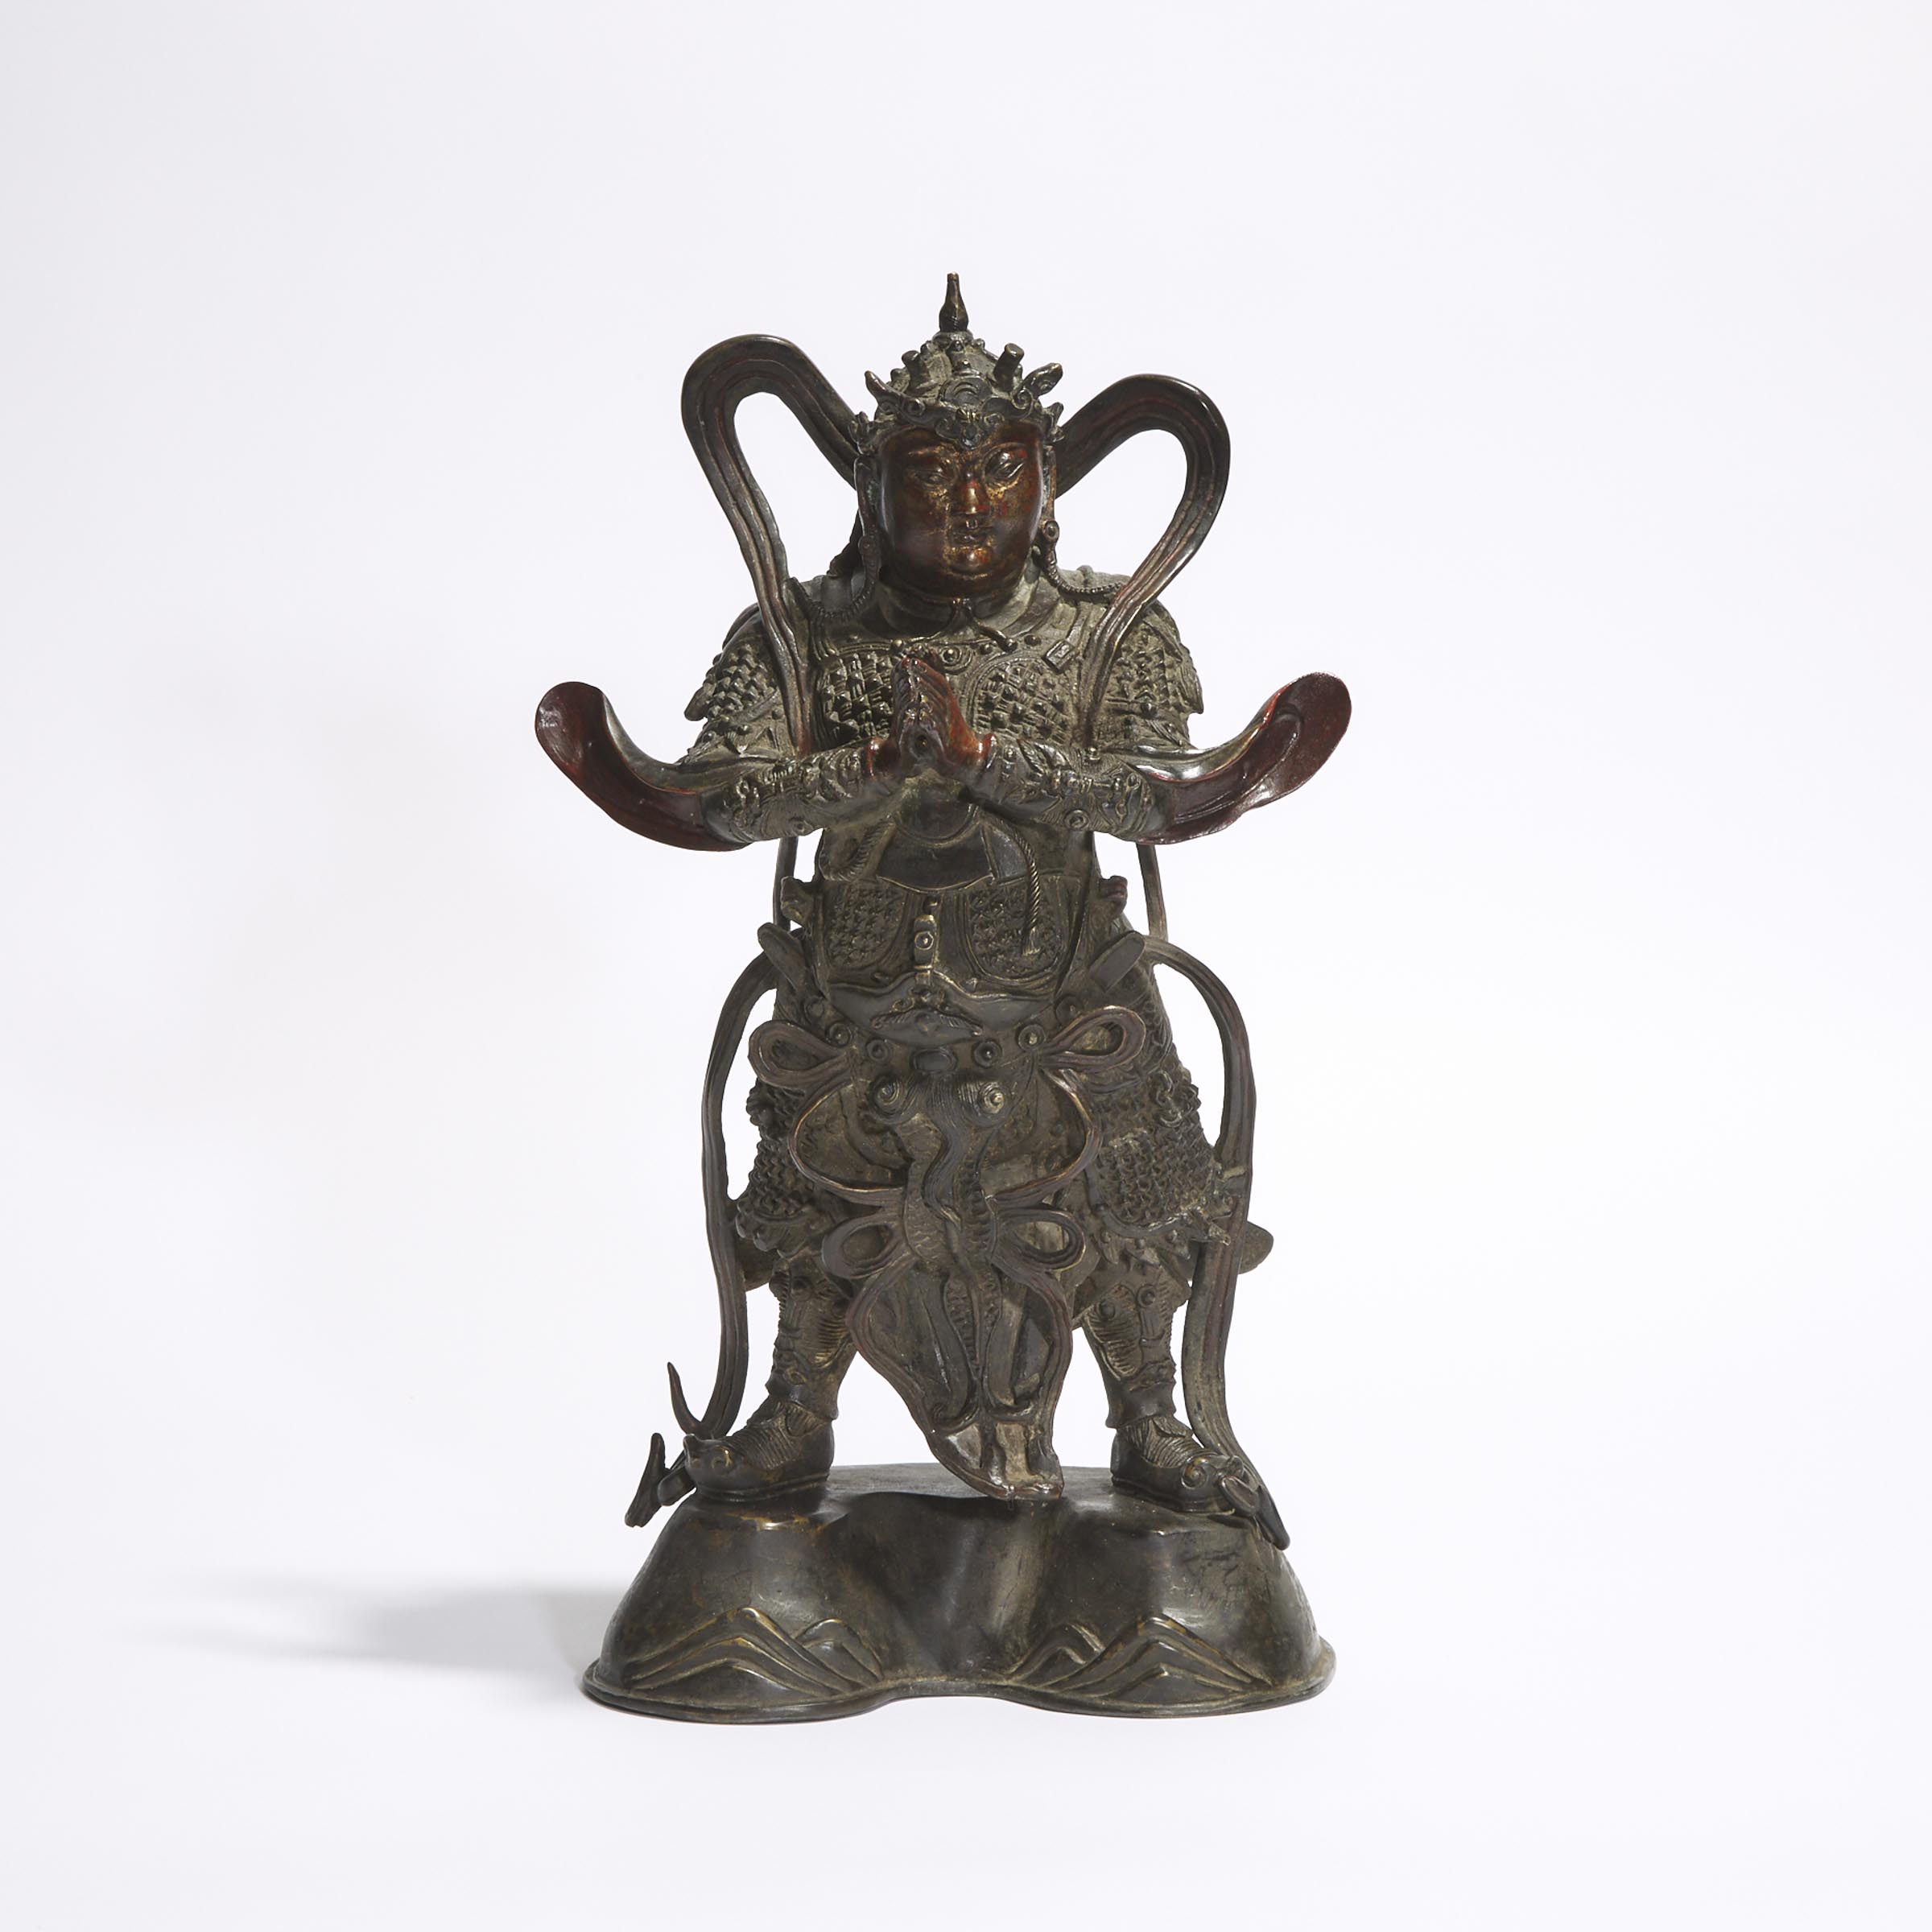 A Large Lacquered Bronze Figure of Weituo, Ming Dynasty, 16th/17th Century